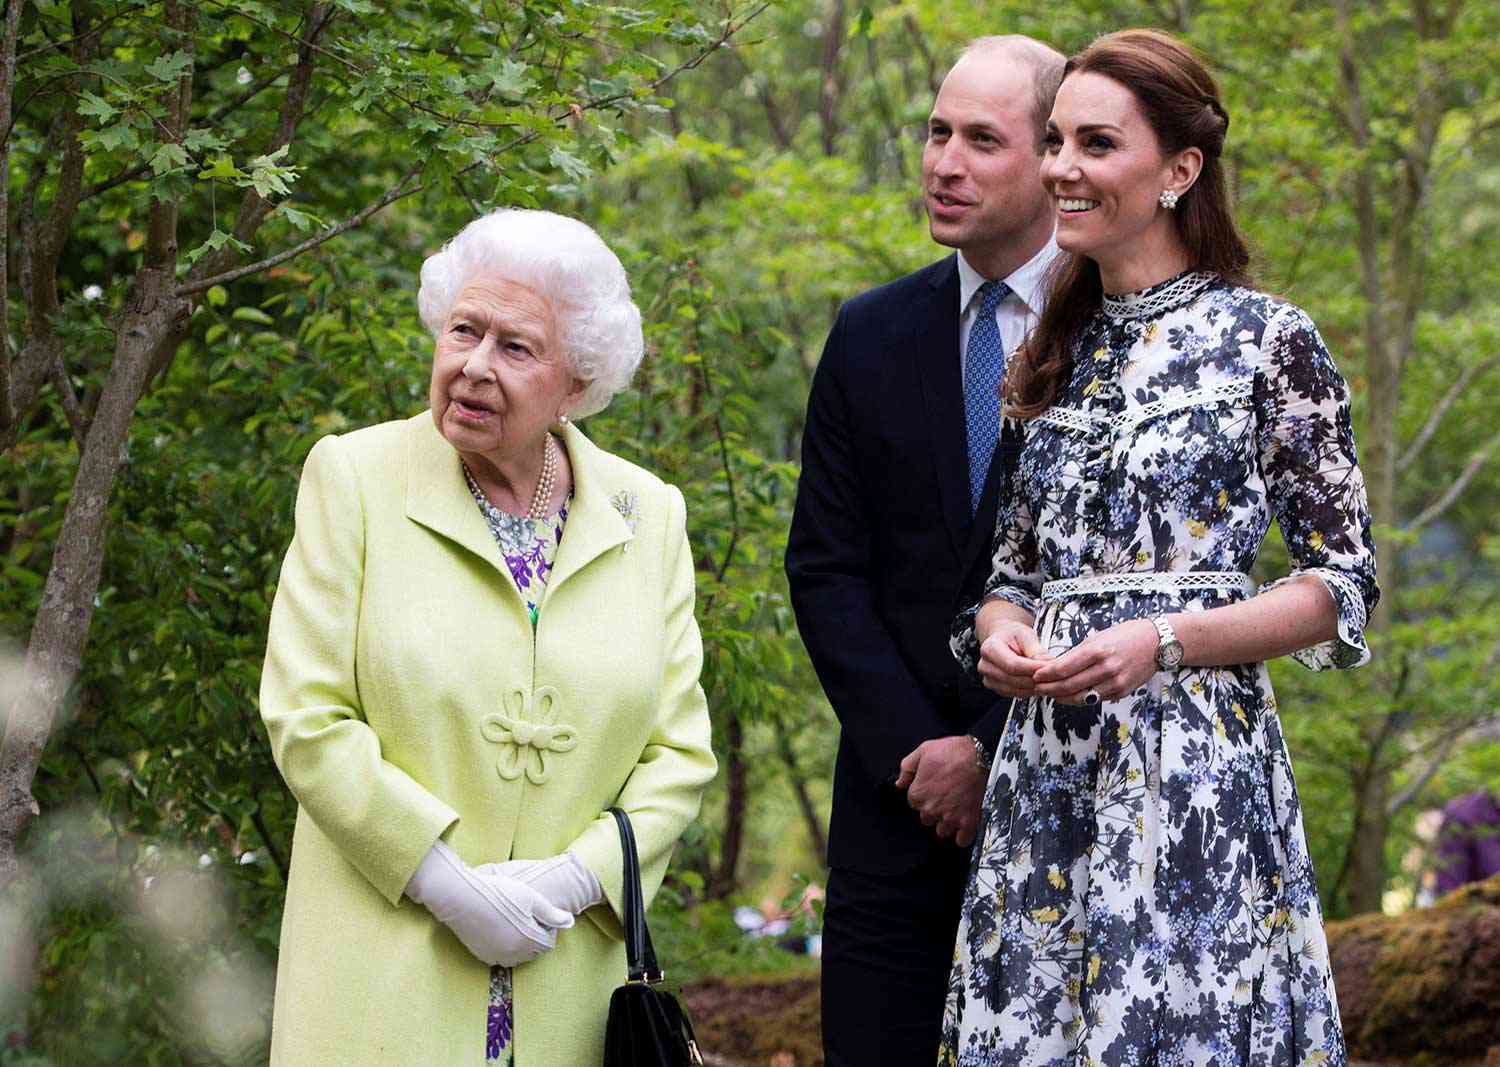 Britain's Catherine, Duchess of Cambridge (R) shows Britain's Queen Elizabeth II (L) and Britain's Prince William, Duke of Cambridge, around the 'Back to Nature Garden' garden, that she designed along with Andree Davies and Adam White, during their visit to the 2019 RHS Chelsea Flower Show in London on May 20, 2019.